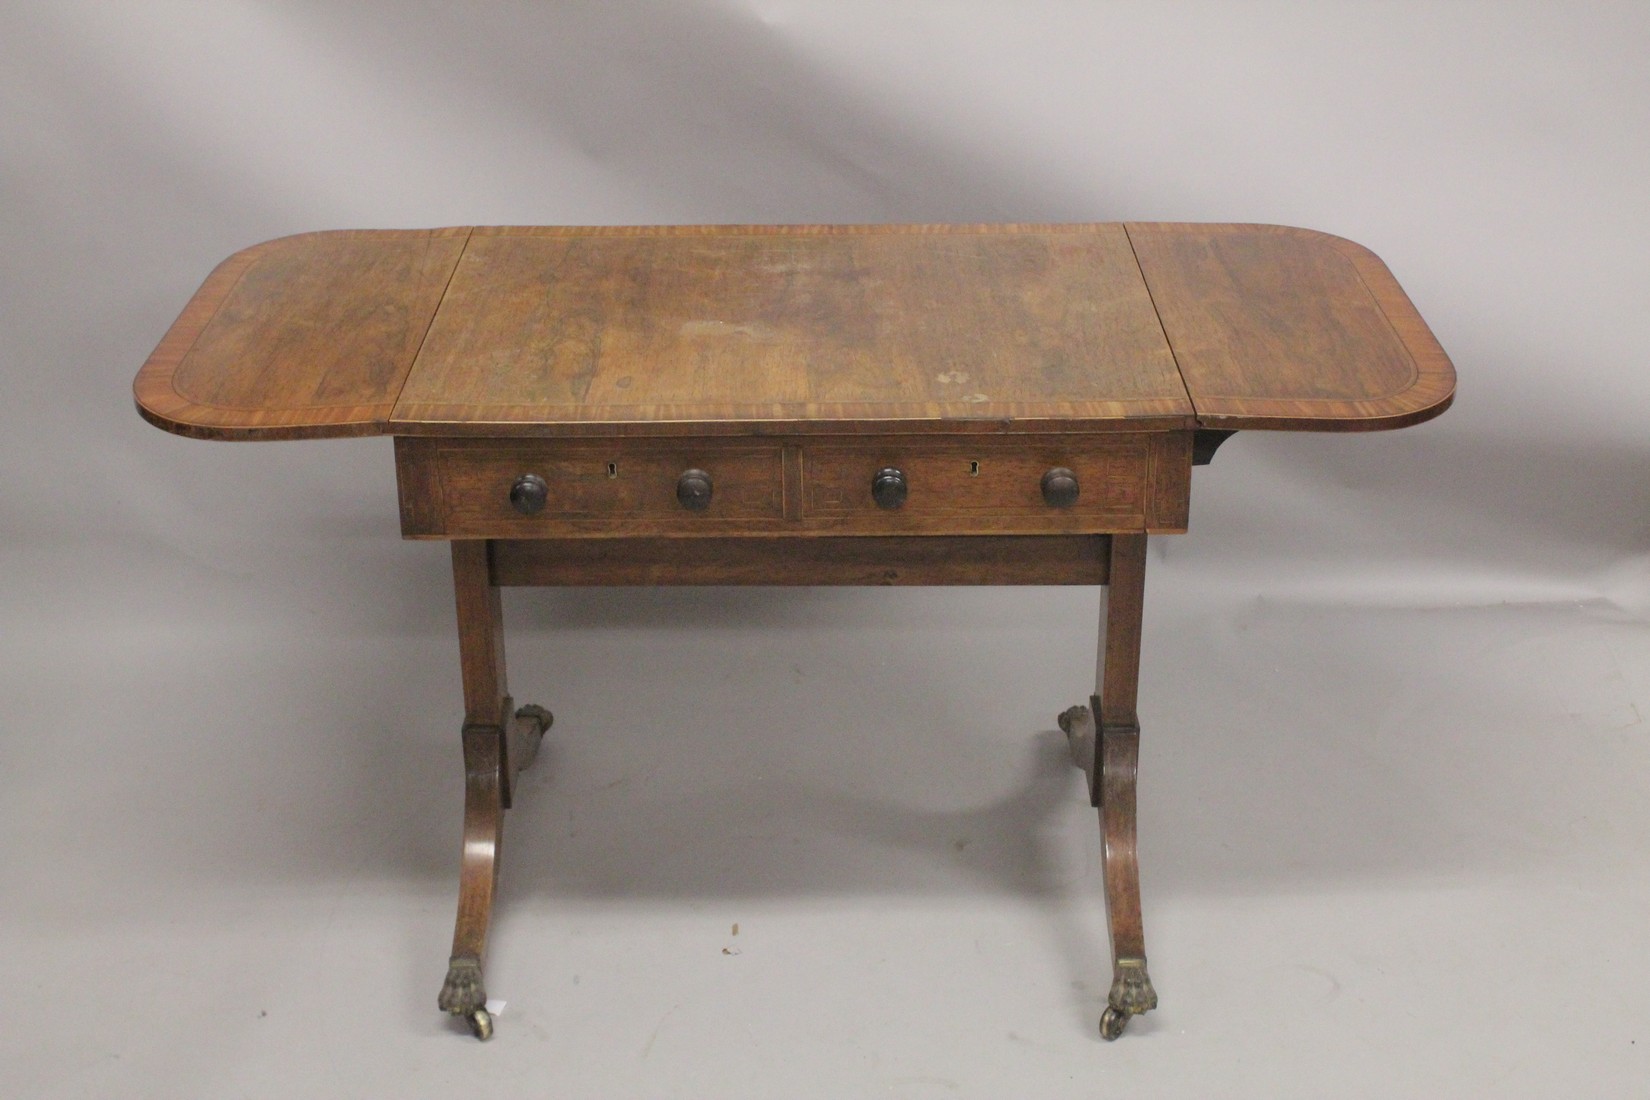 A REGENCY ROSEWOOD SOFA TABLE with folding flaps, on curving legs with casters. 4ft 4ins long - Image 4 of 4